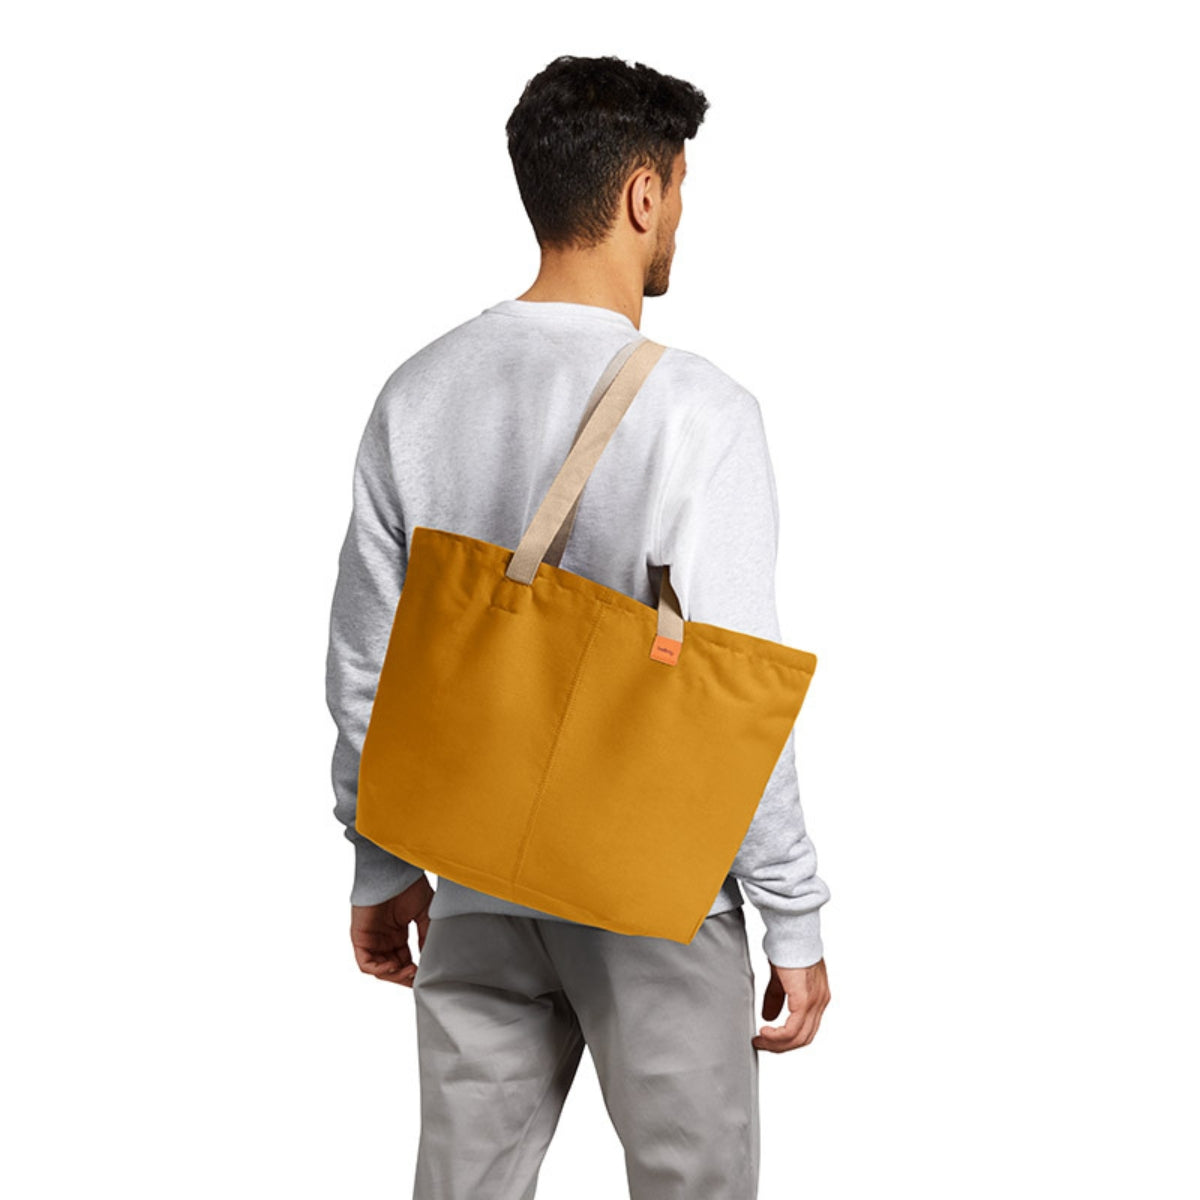 Bellroy Market Tote in Copper